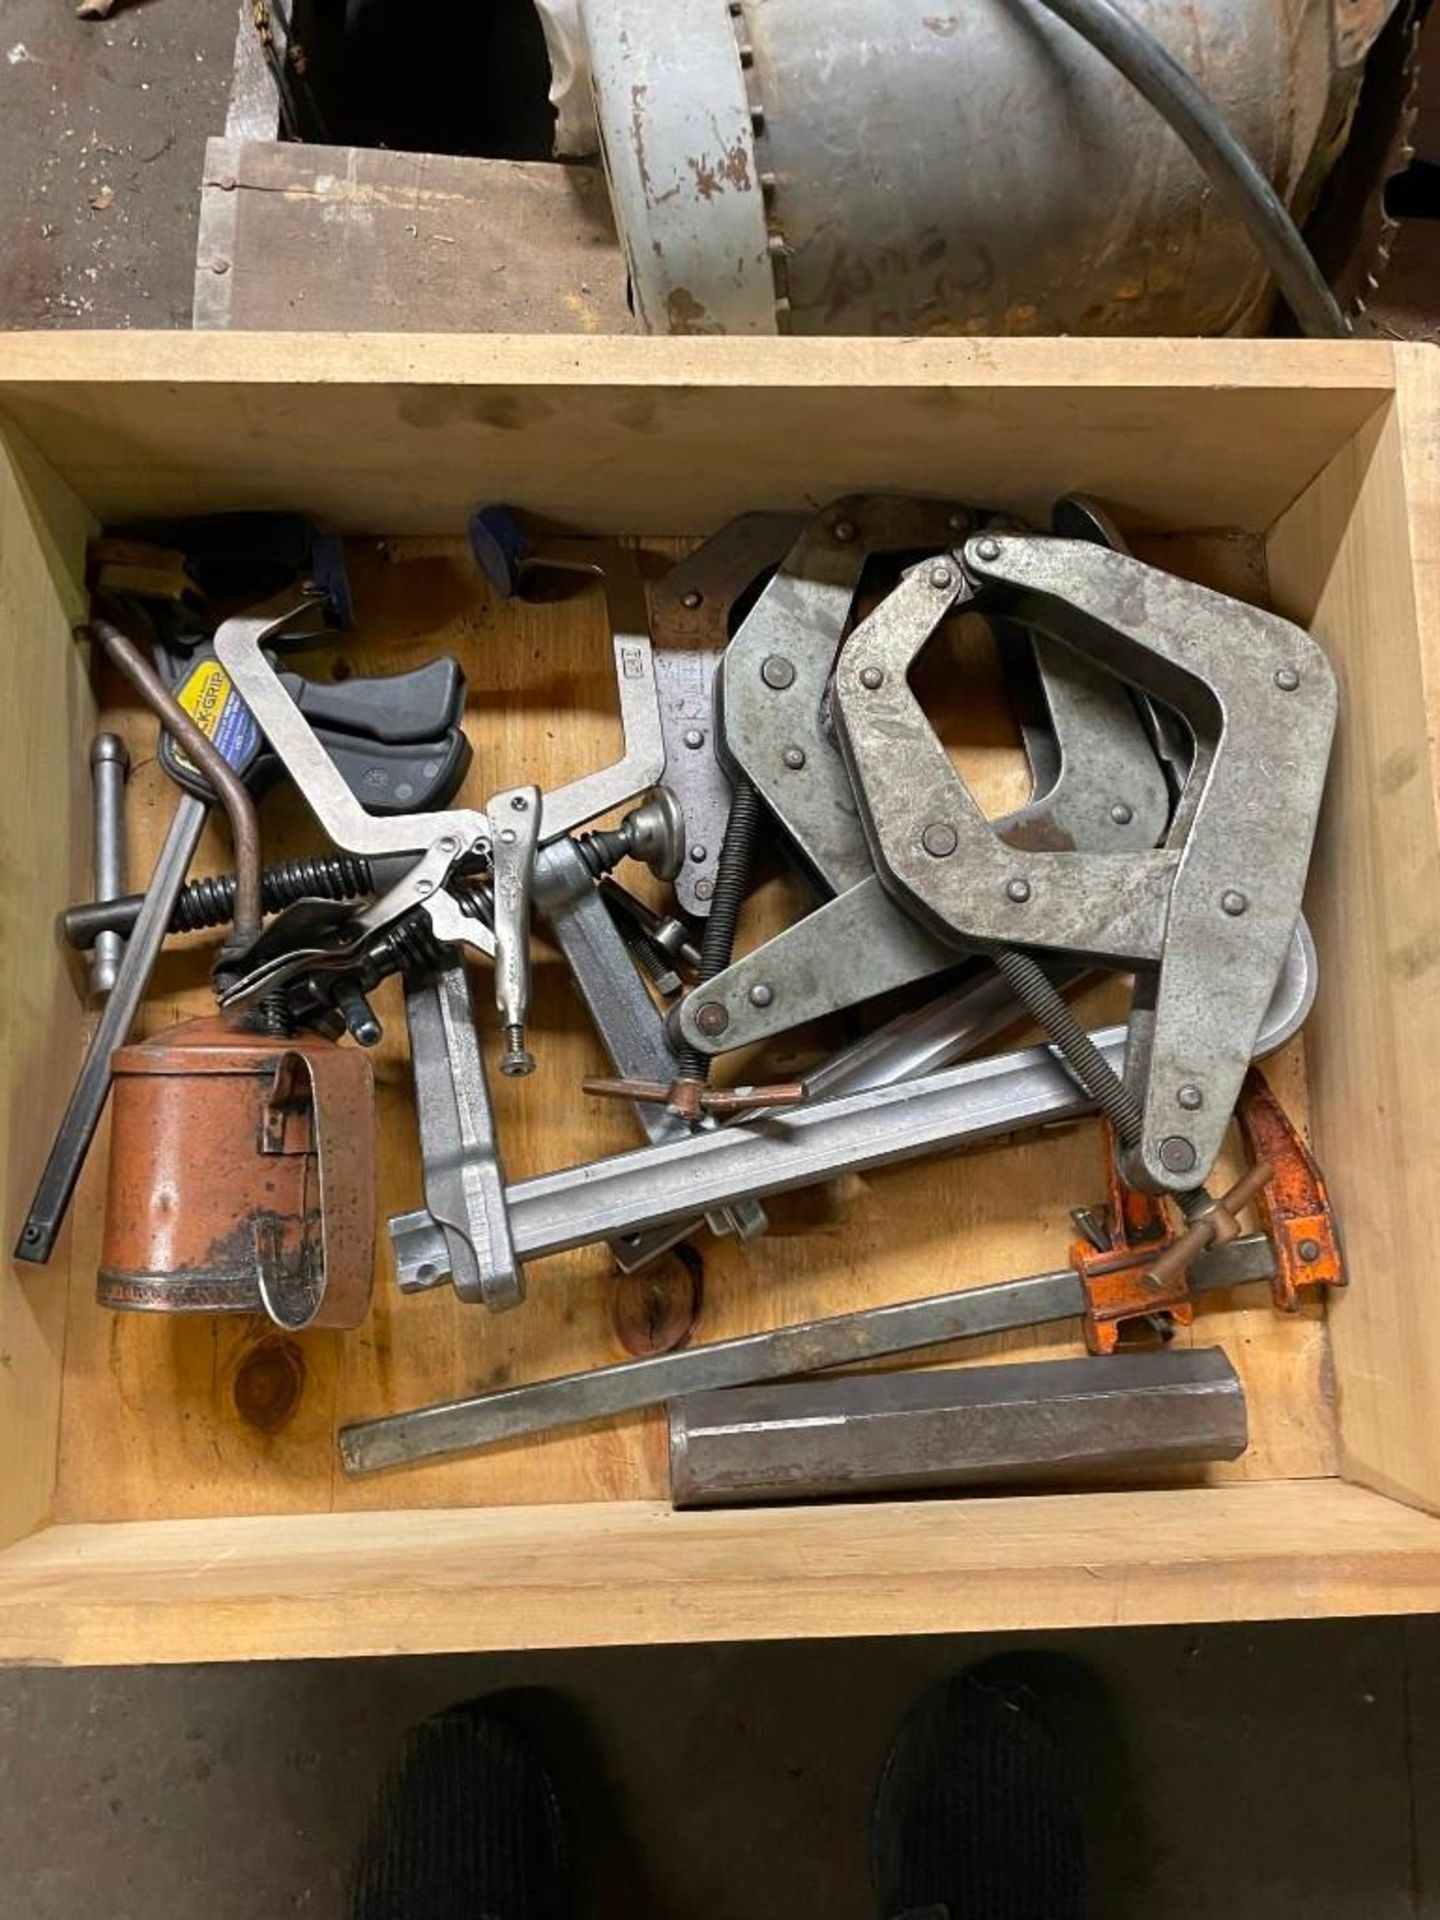 LOT OF CLAMPS, PUMPS, FILTERS - Image 2 of 7